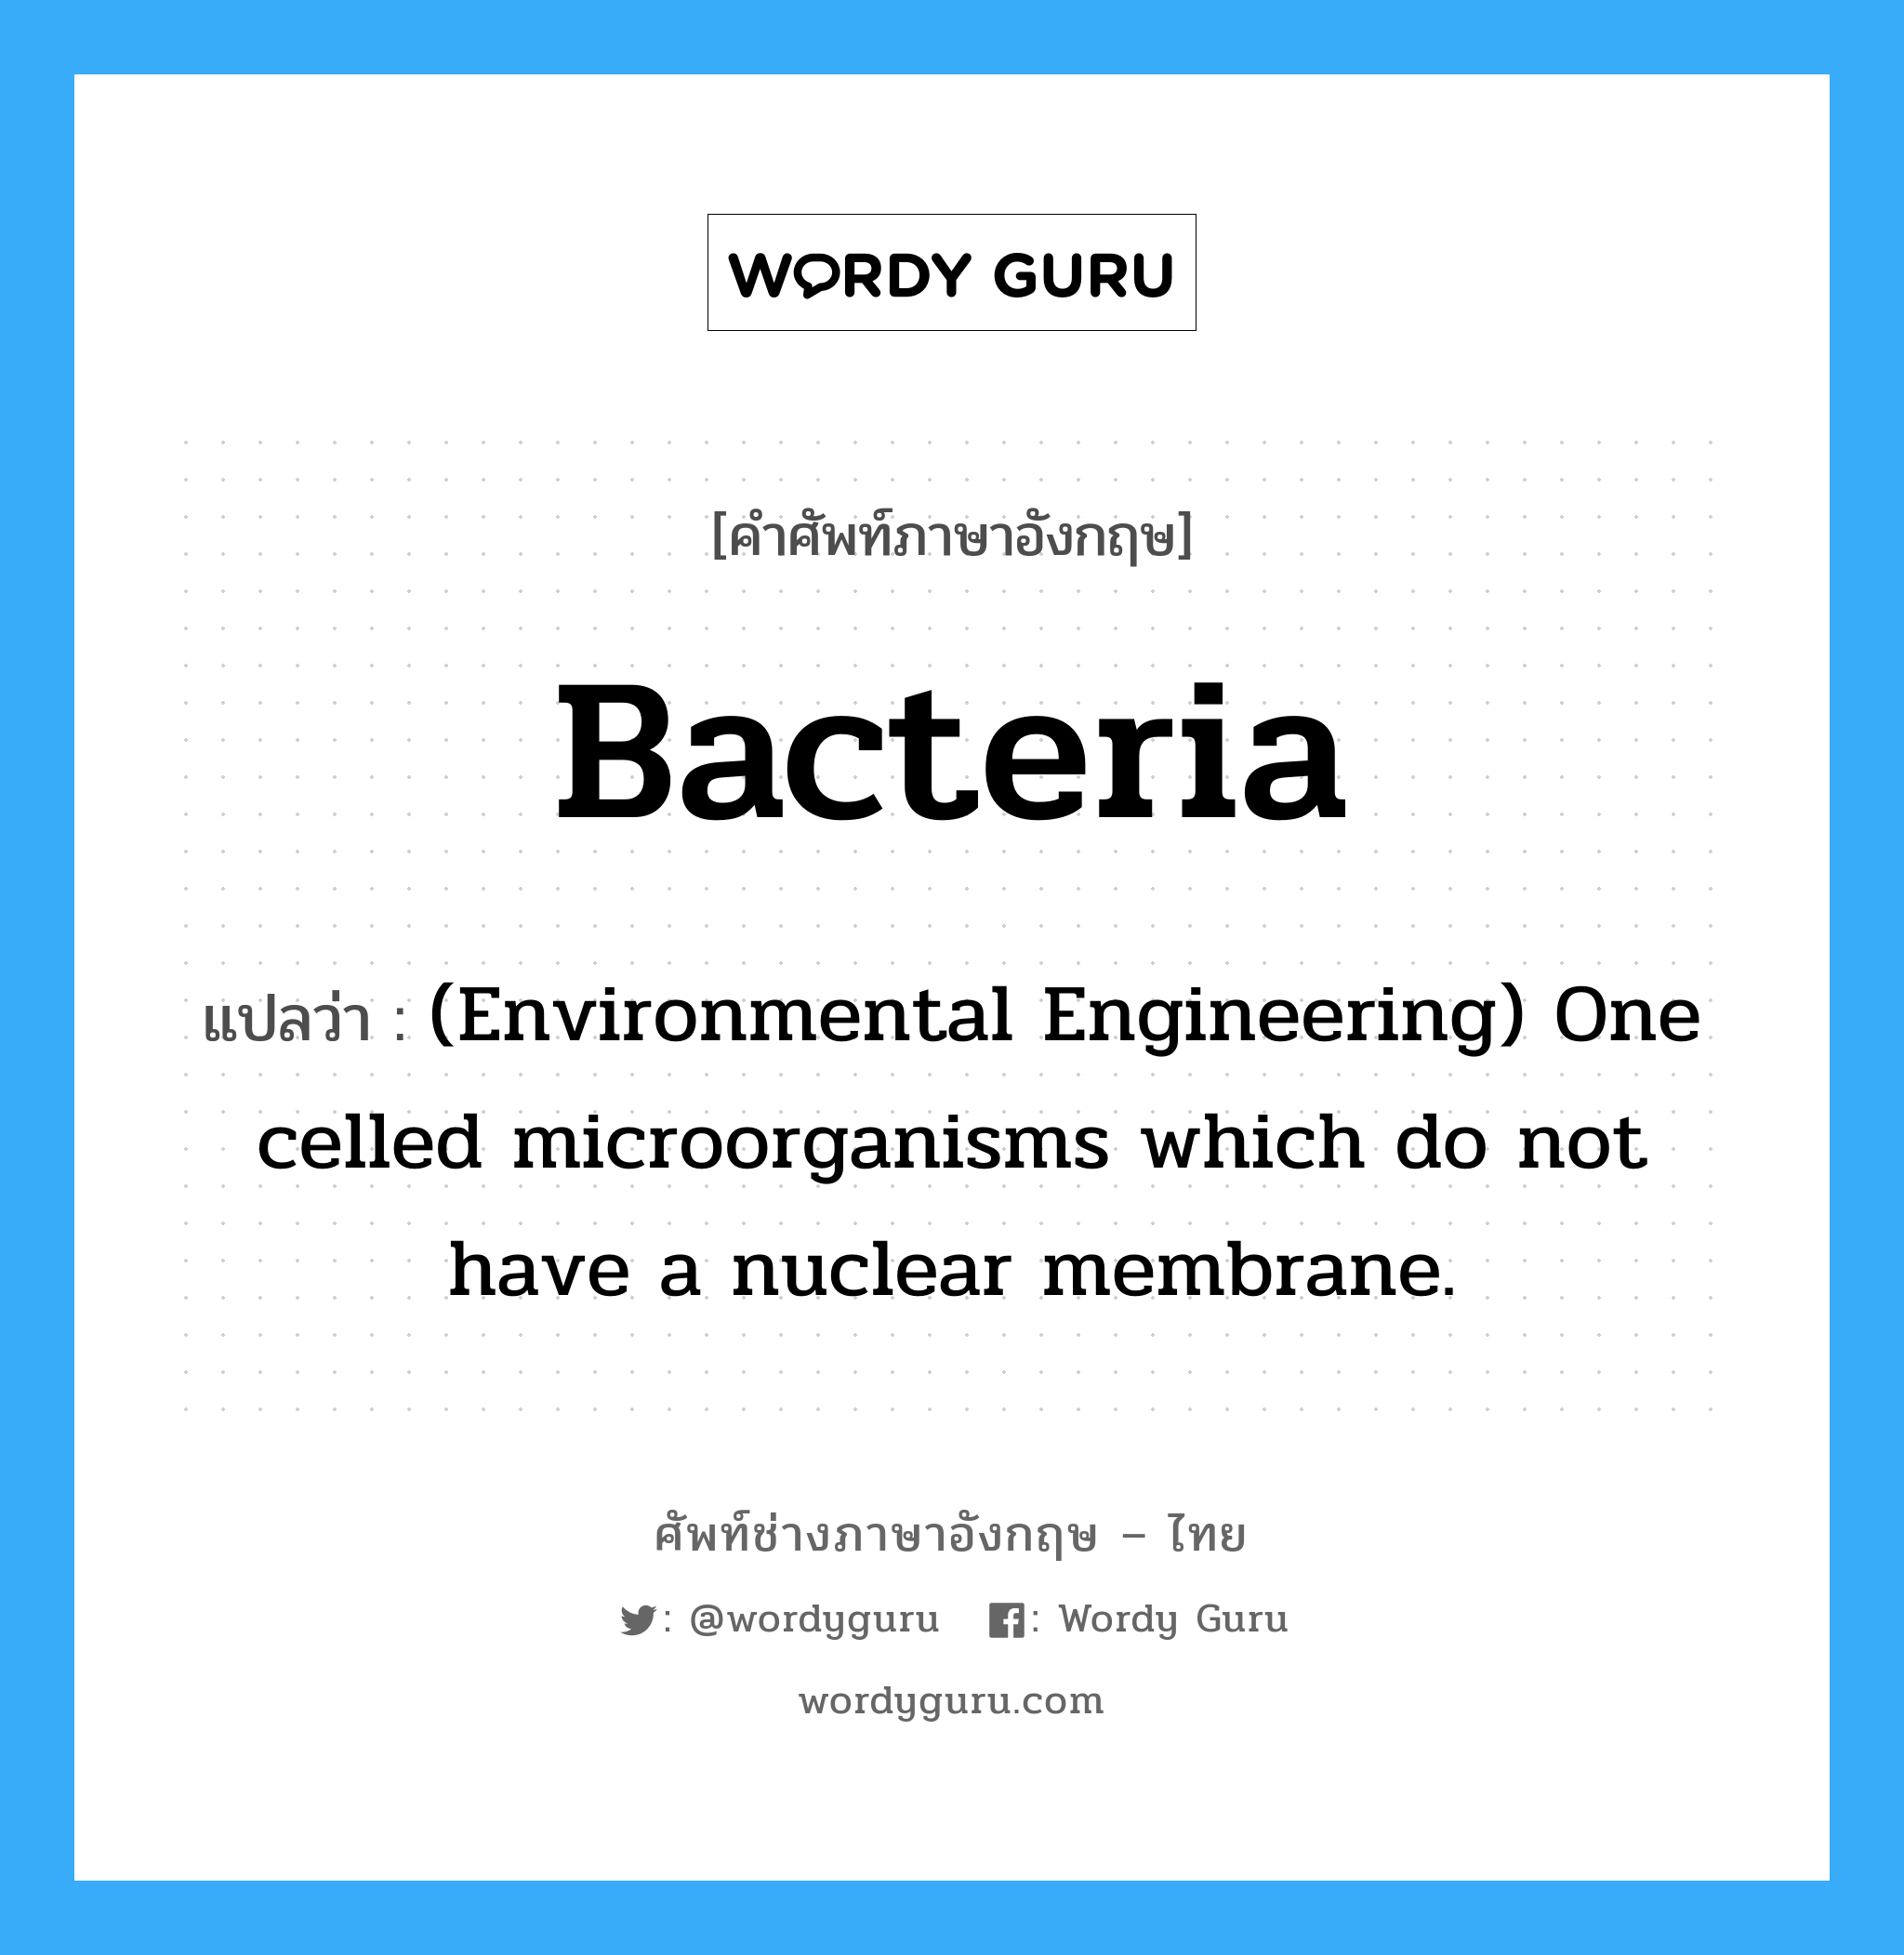 Bacteria แปลว่า?, คำศัพท์ช่างภาษาอังกฤษ - ไทย Bacteria คำศัพท์ภาษาอังกฤษ Bacteria แปลว่า (Environmental Engineering) One celled microorganisms which do not have a nuclear membrane.